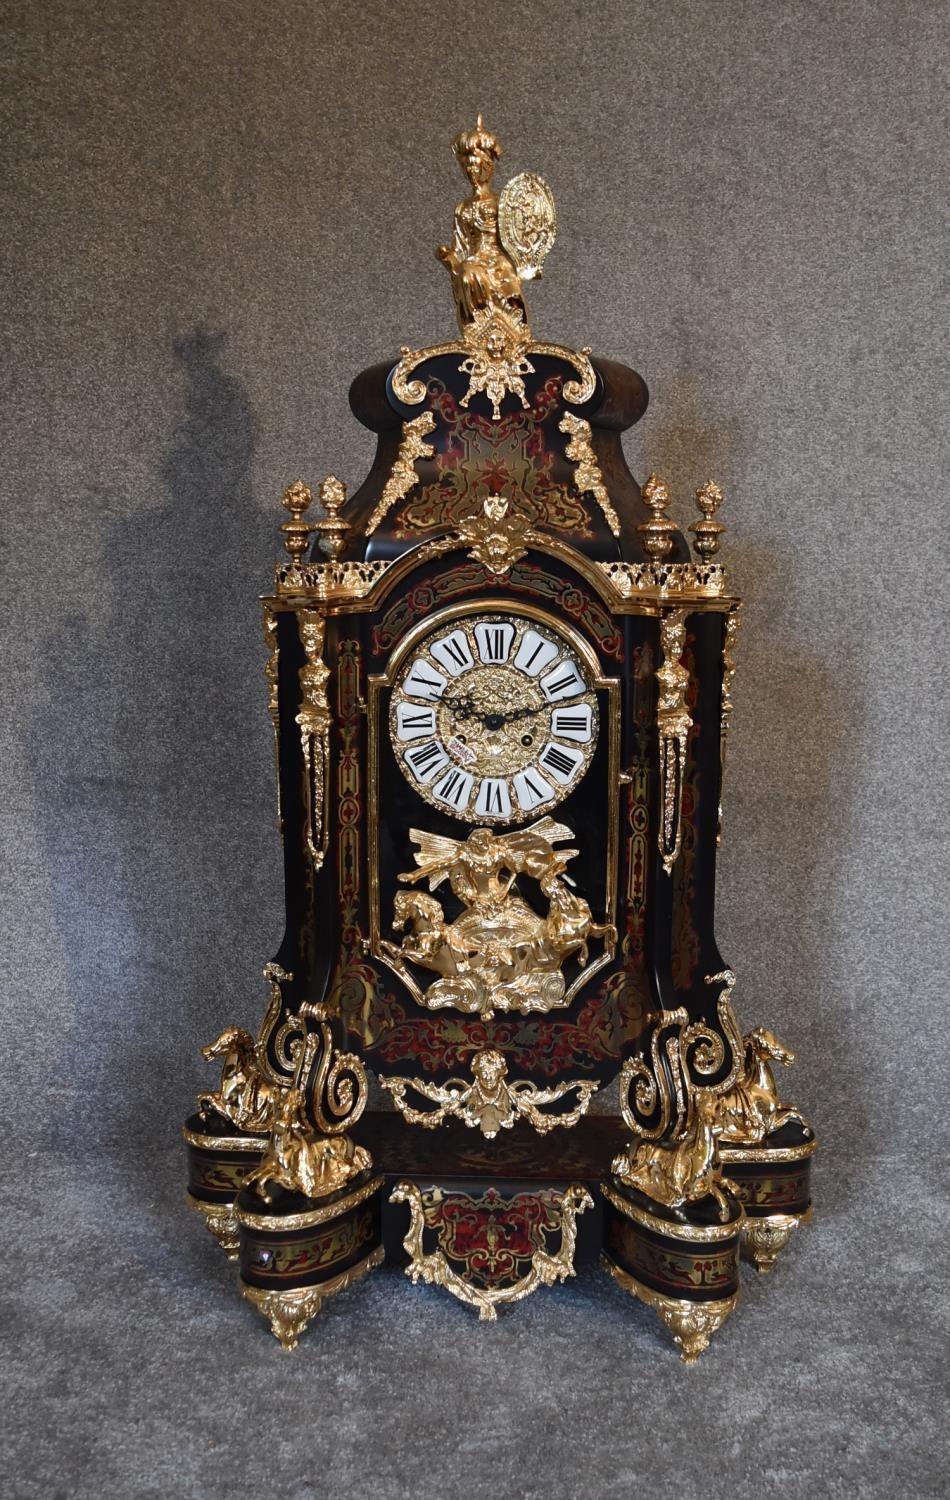 A decorative French style mantel clock in the Boulle manner with figural surmount on matching - Image 2 of 6